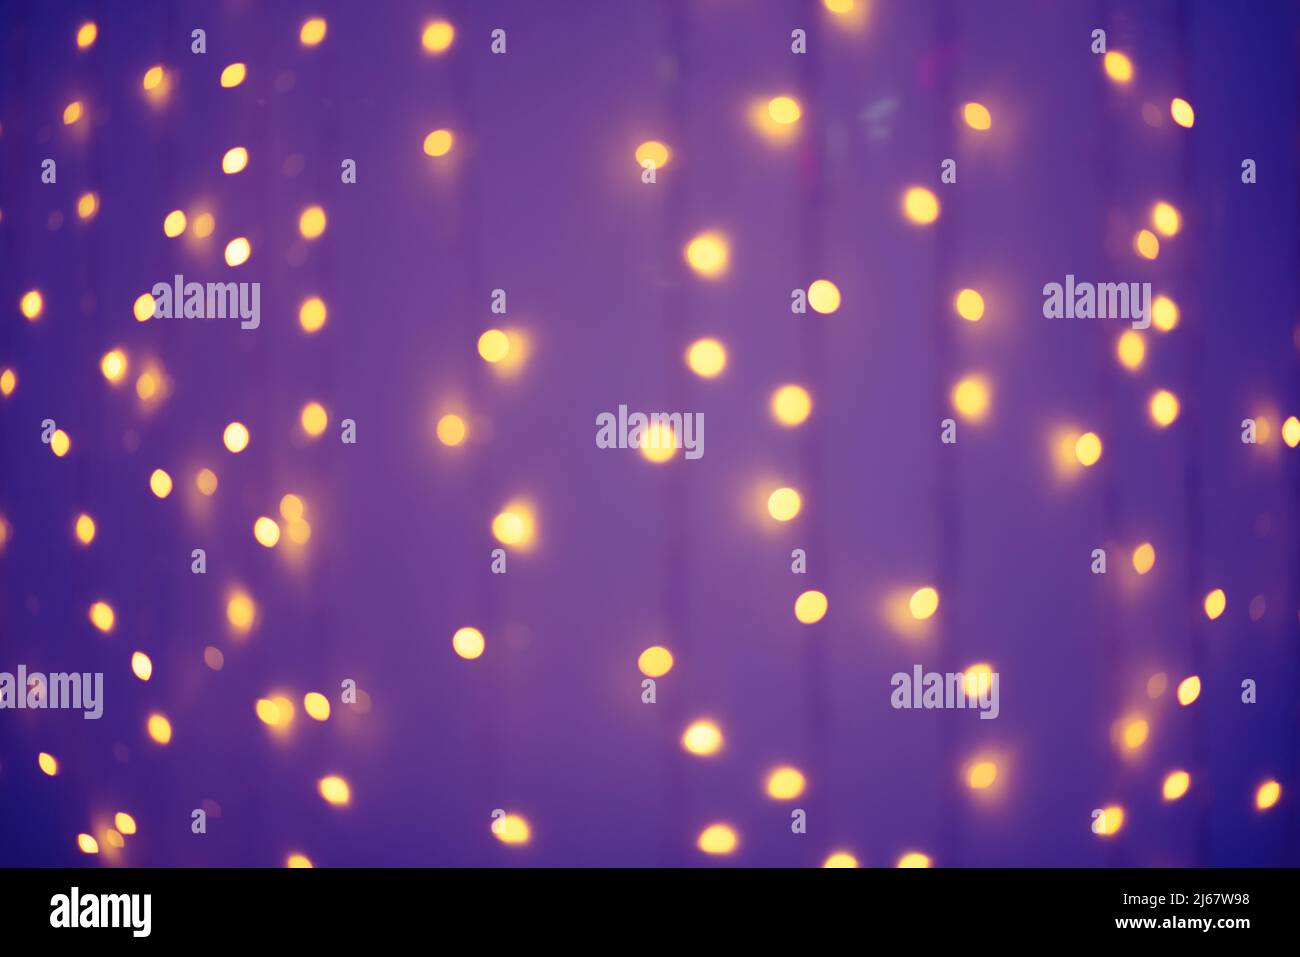 Blurred abstract: blurry orange garlands in the purple background. Stock Photo